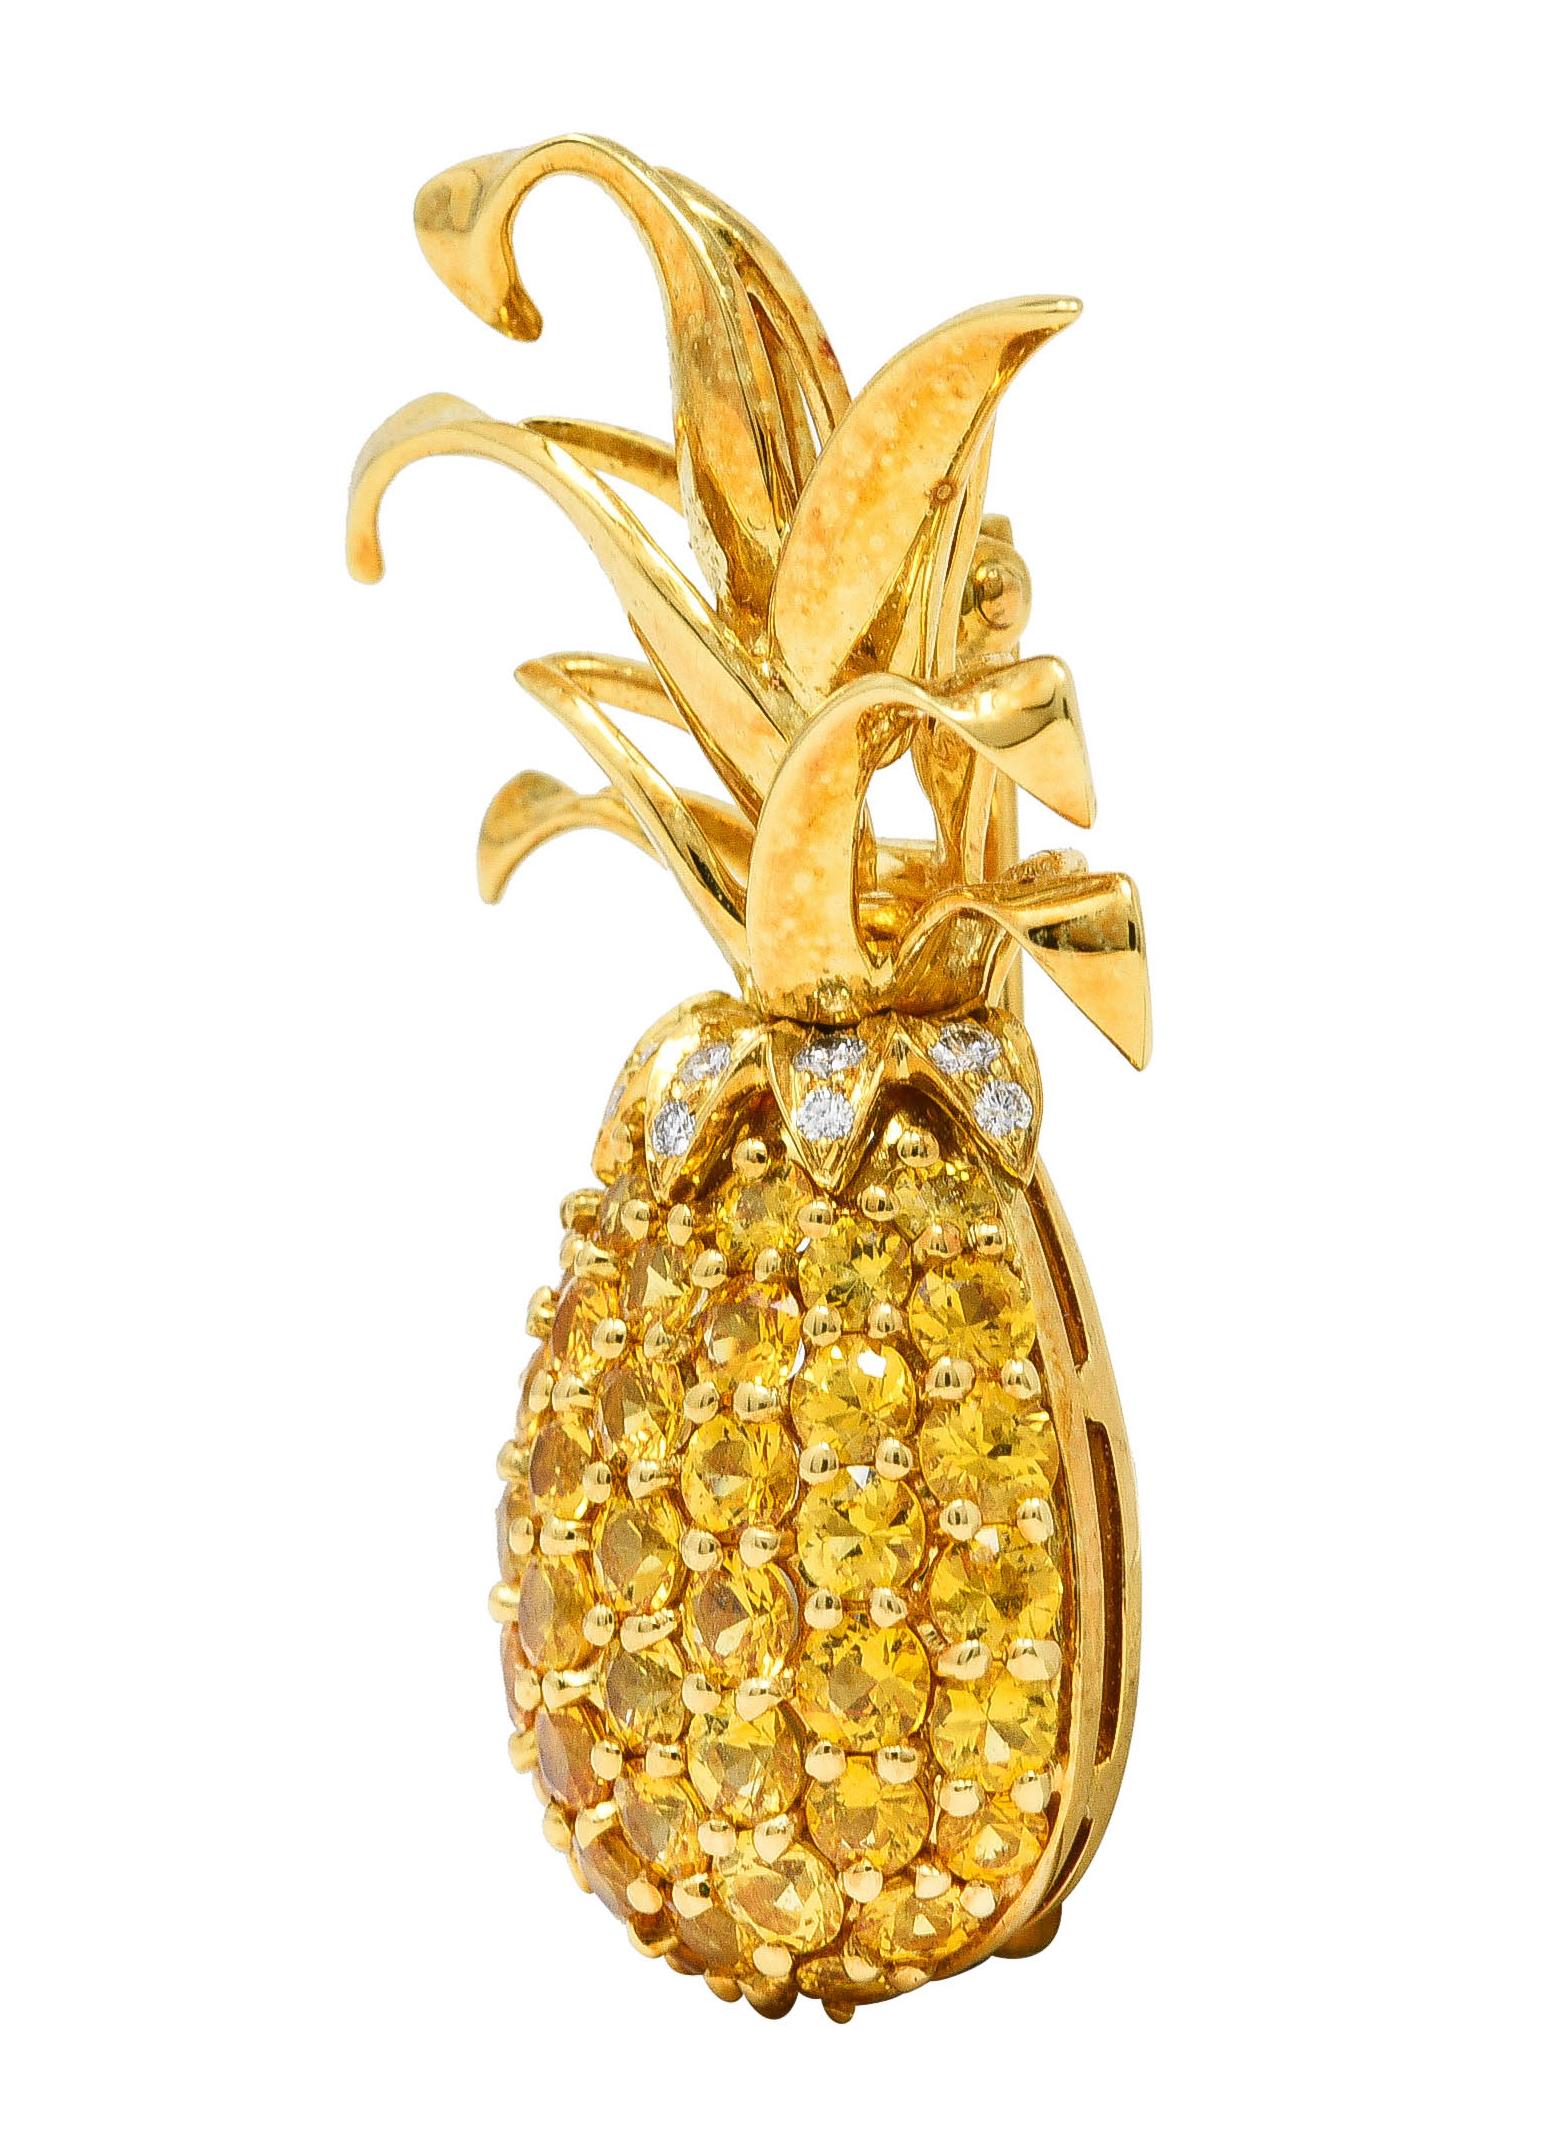 Designed as a stylized pineapple fruit with a furling crown of high polished gold leaves. Body features pavé set round cut sapphires weighing approximately 4.50 carats total. Transparent bright orangey-yellow in color with medium saturation.